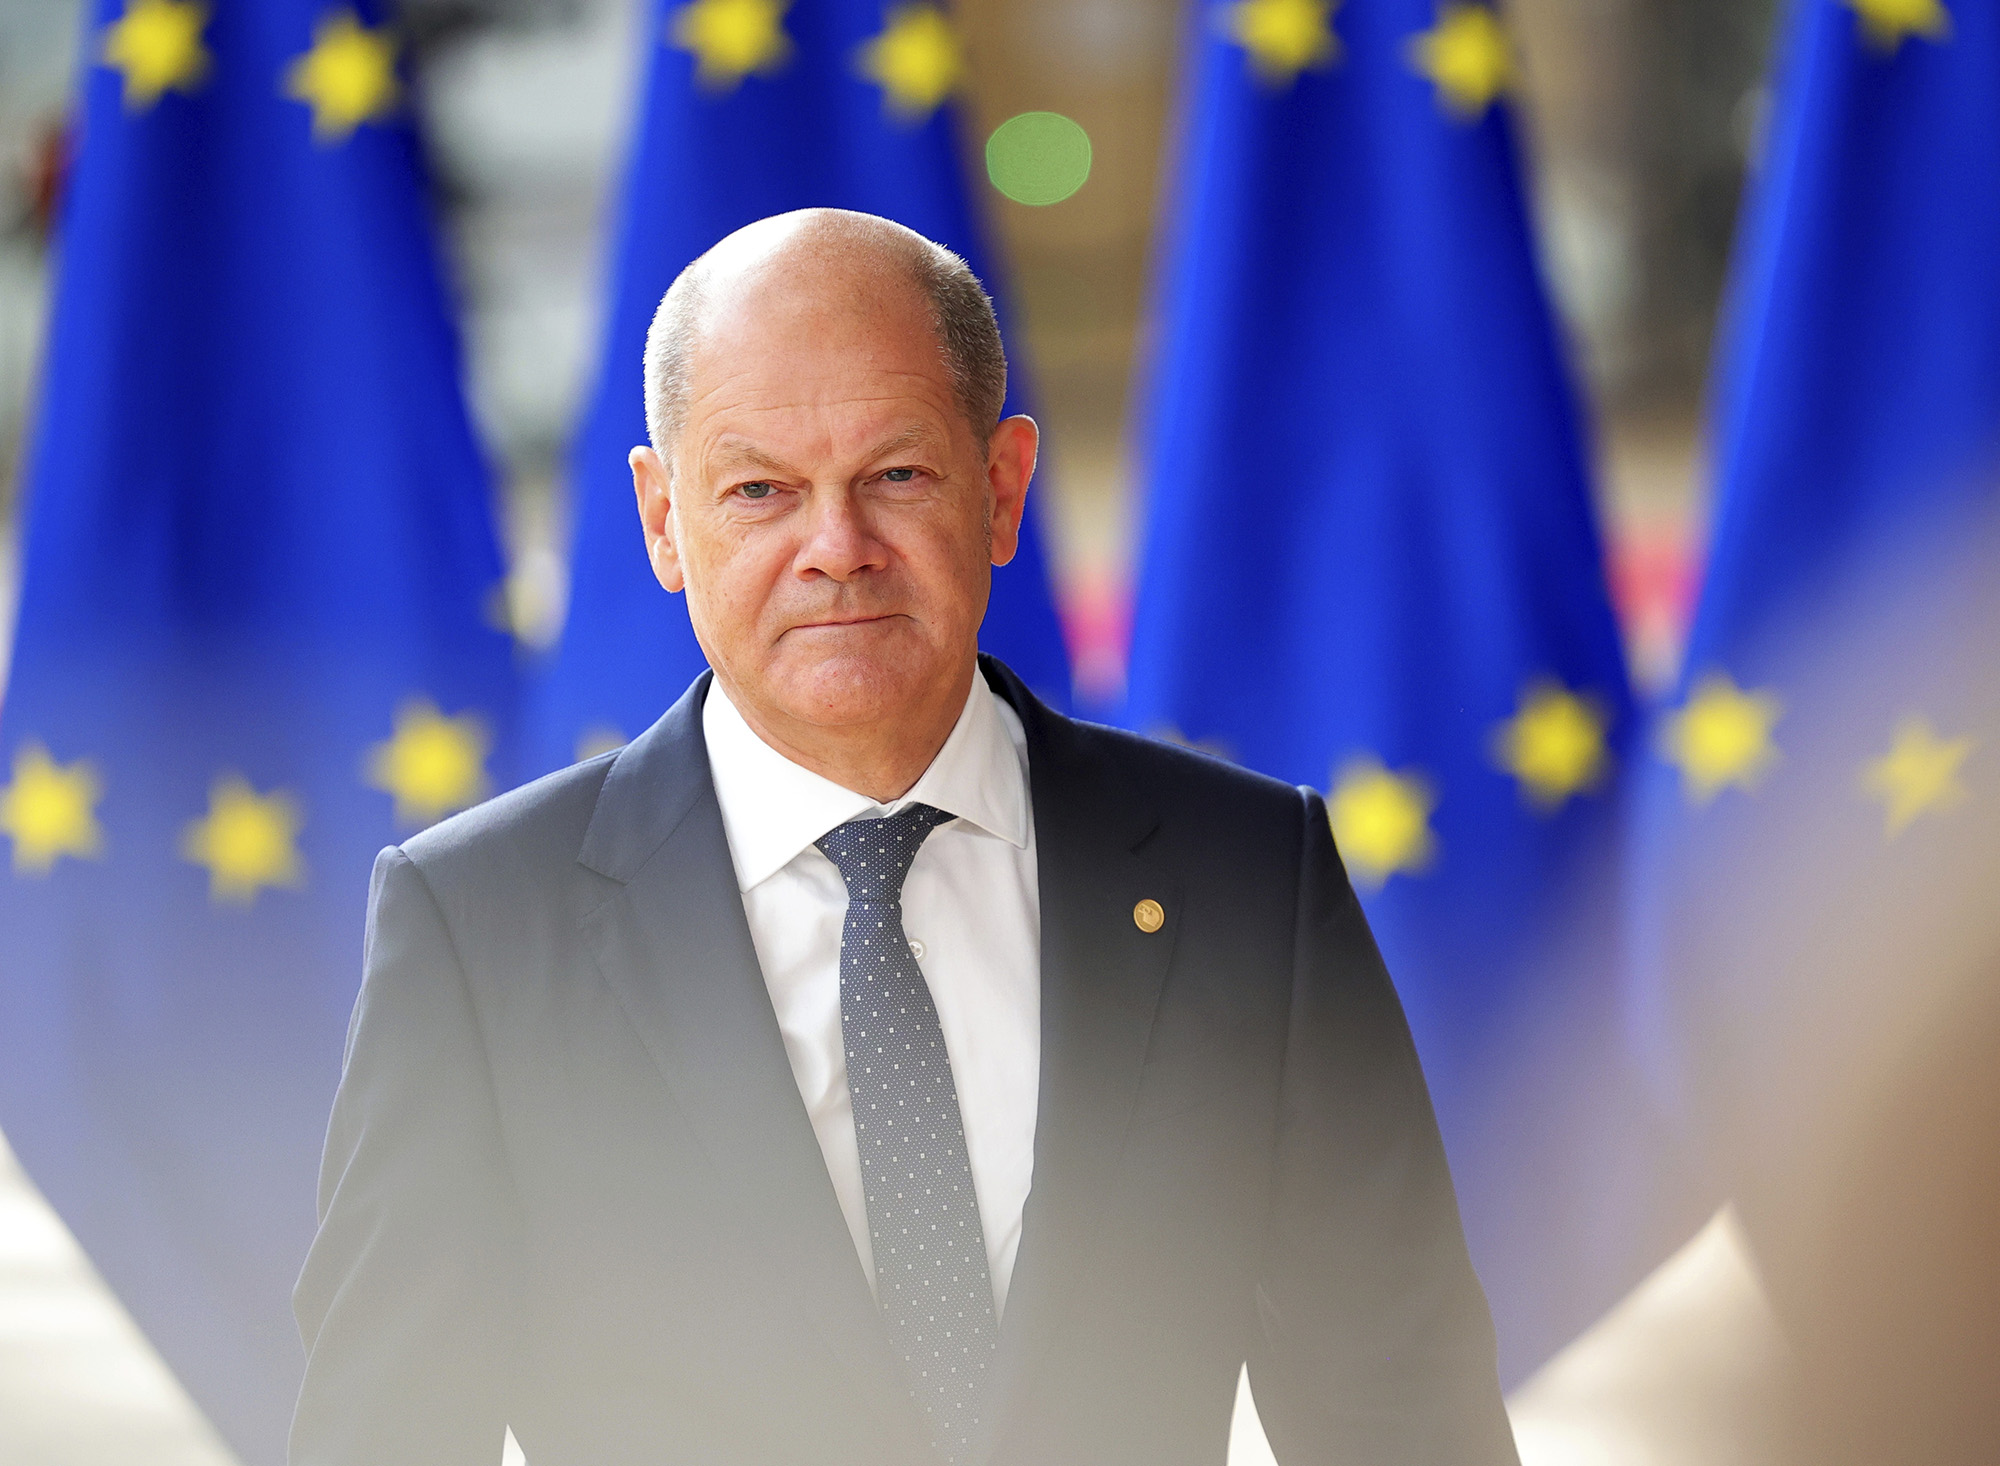 German Chancellor Olaf Scholz arrives for an EU summit in Brussels, Belgium, on June 23.